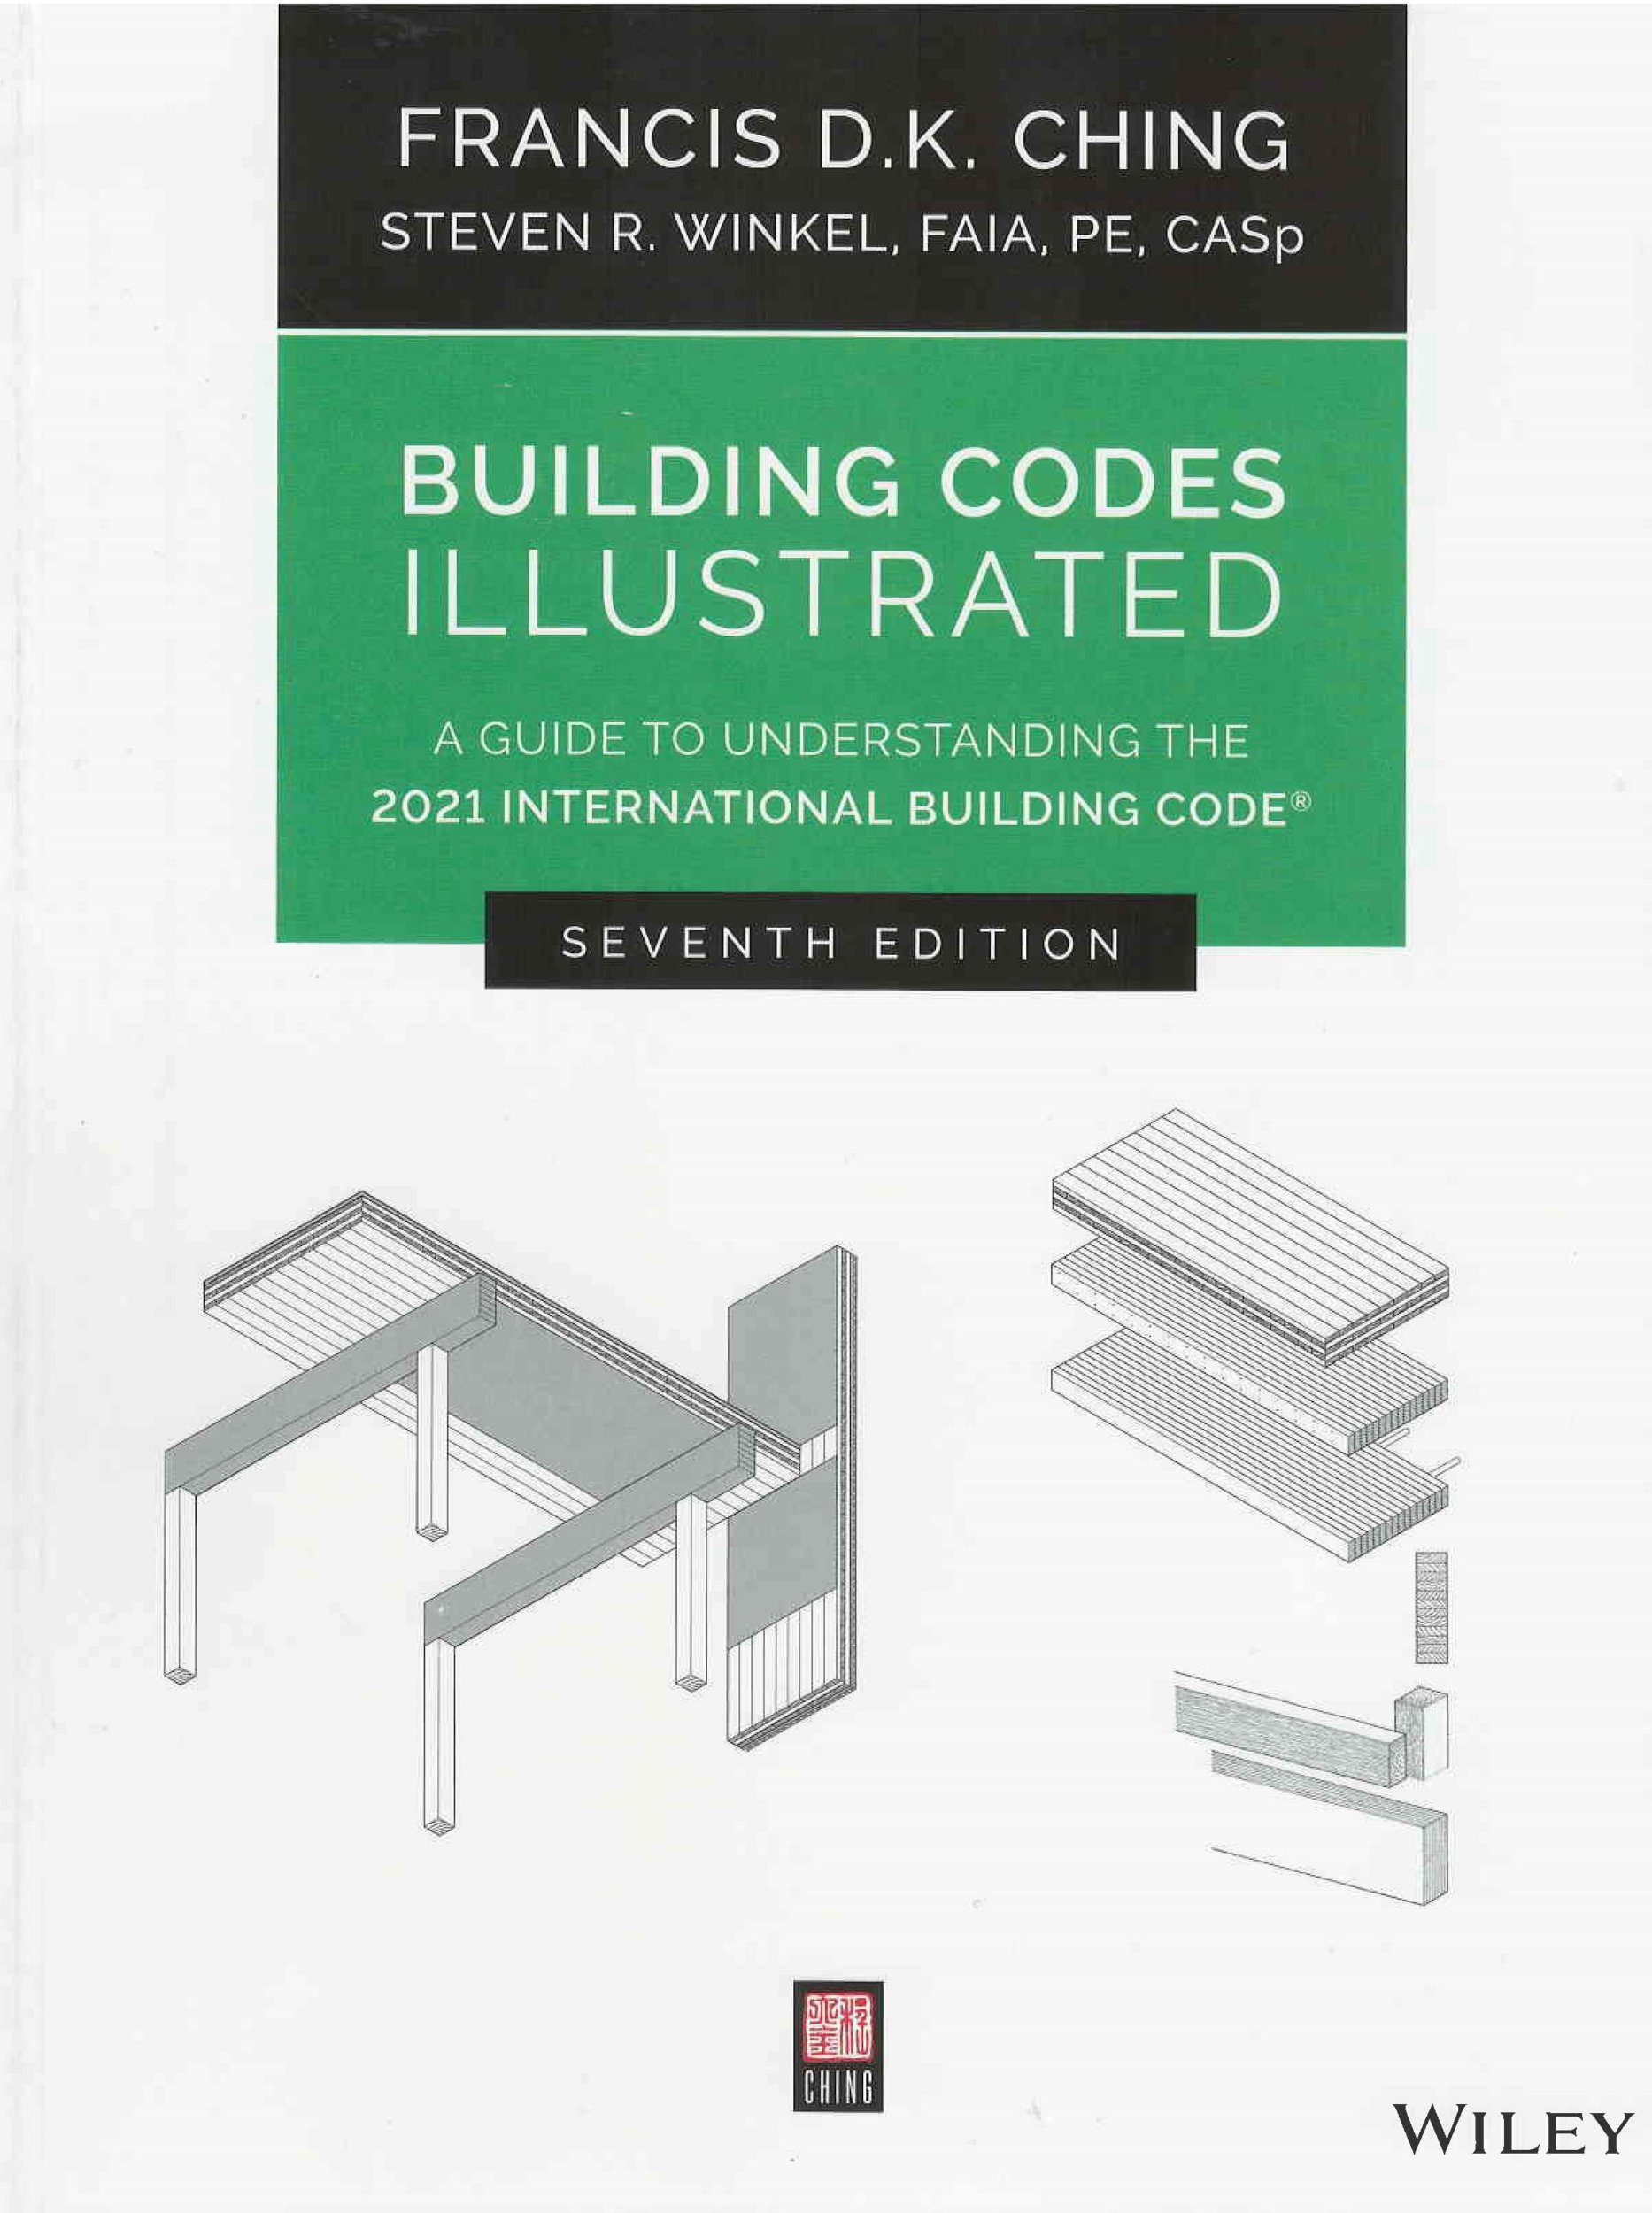 Building codes illustrated : a guide to understanding the 2021 International building code